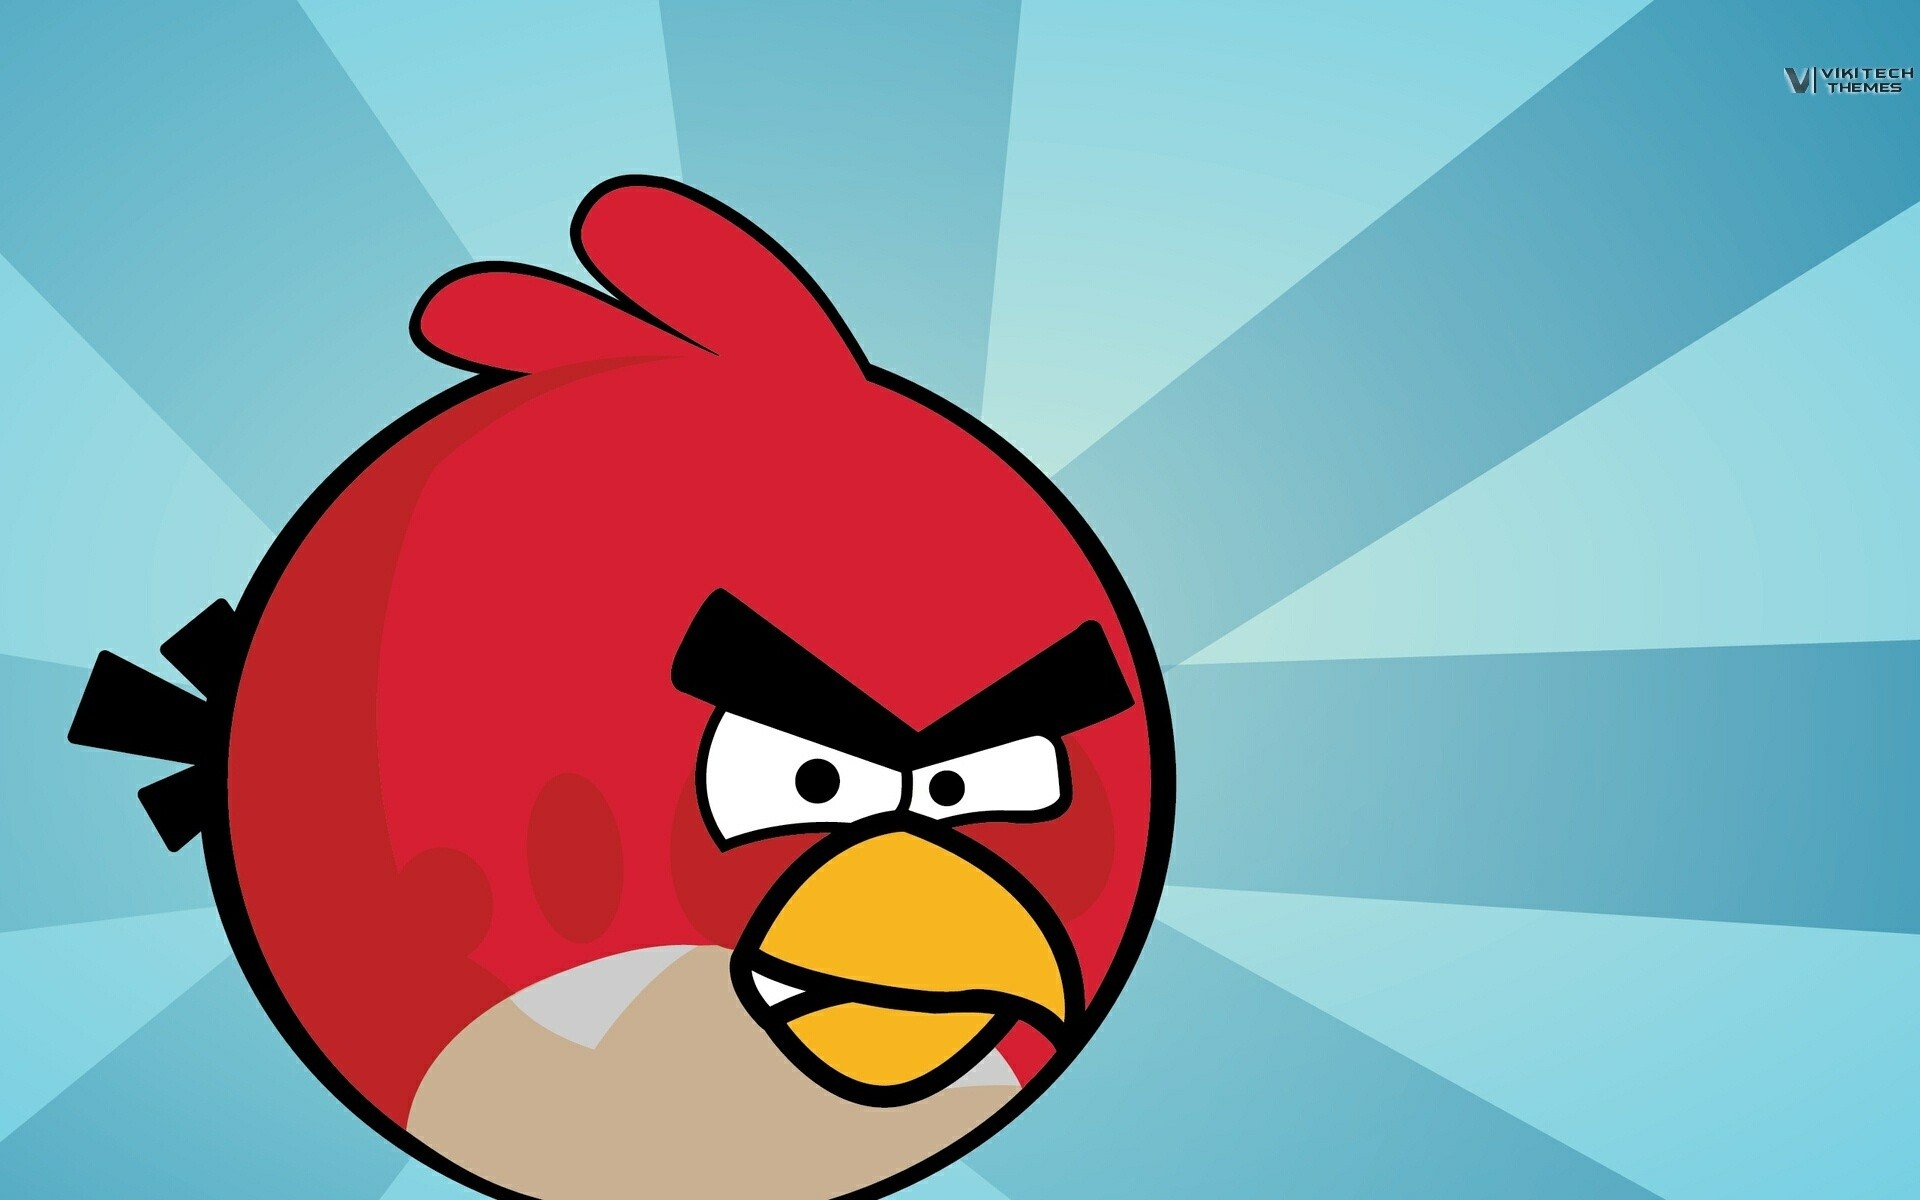 angry birds download free